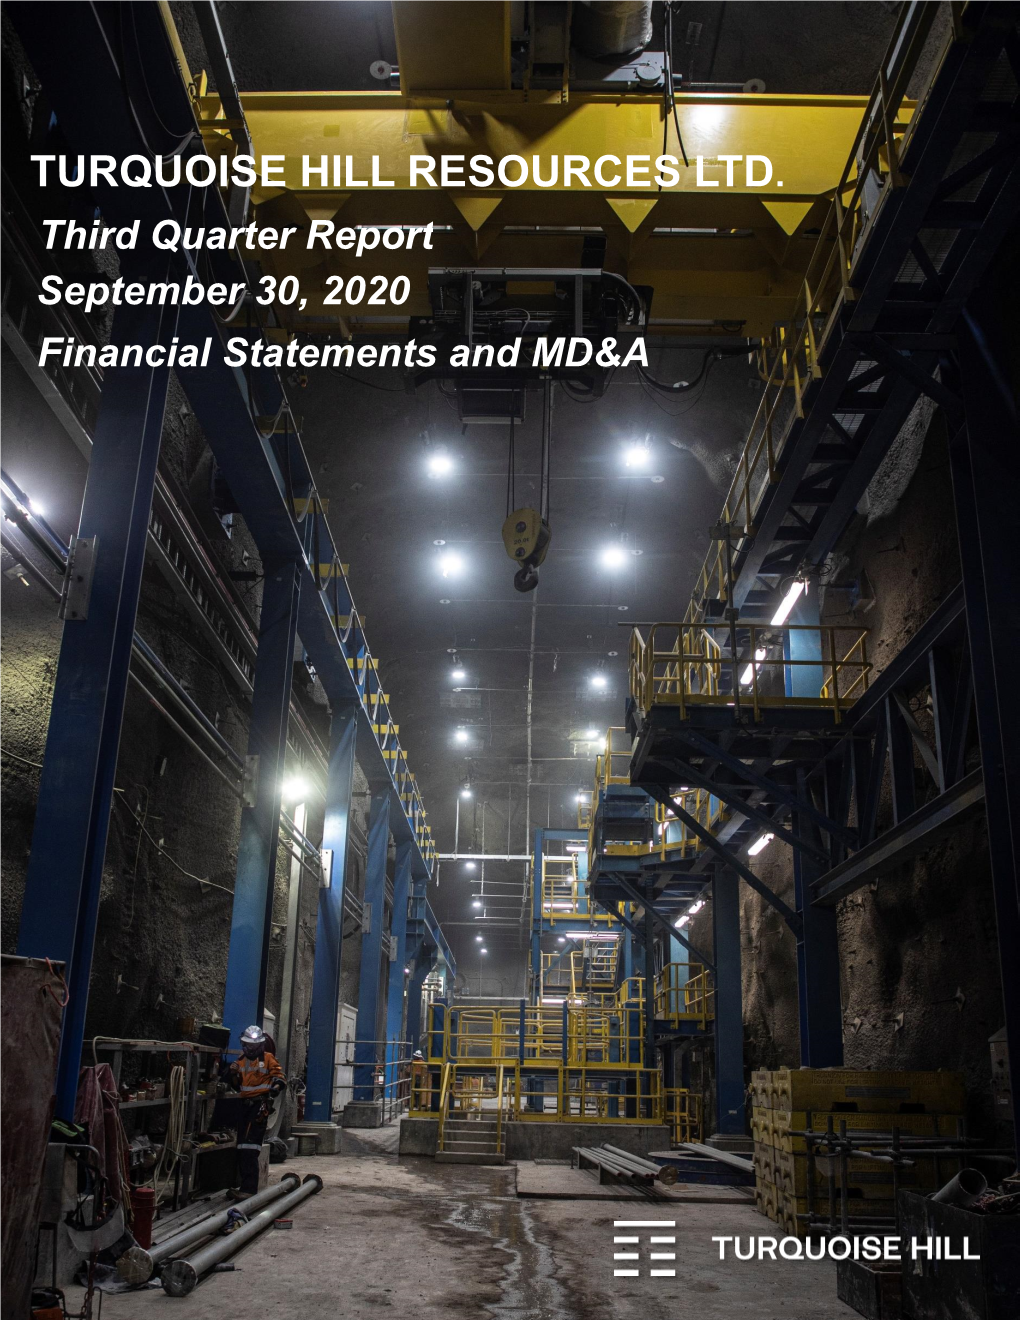 Turquoise Hill Resources Ltd